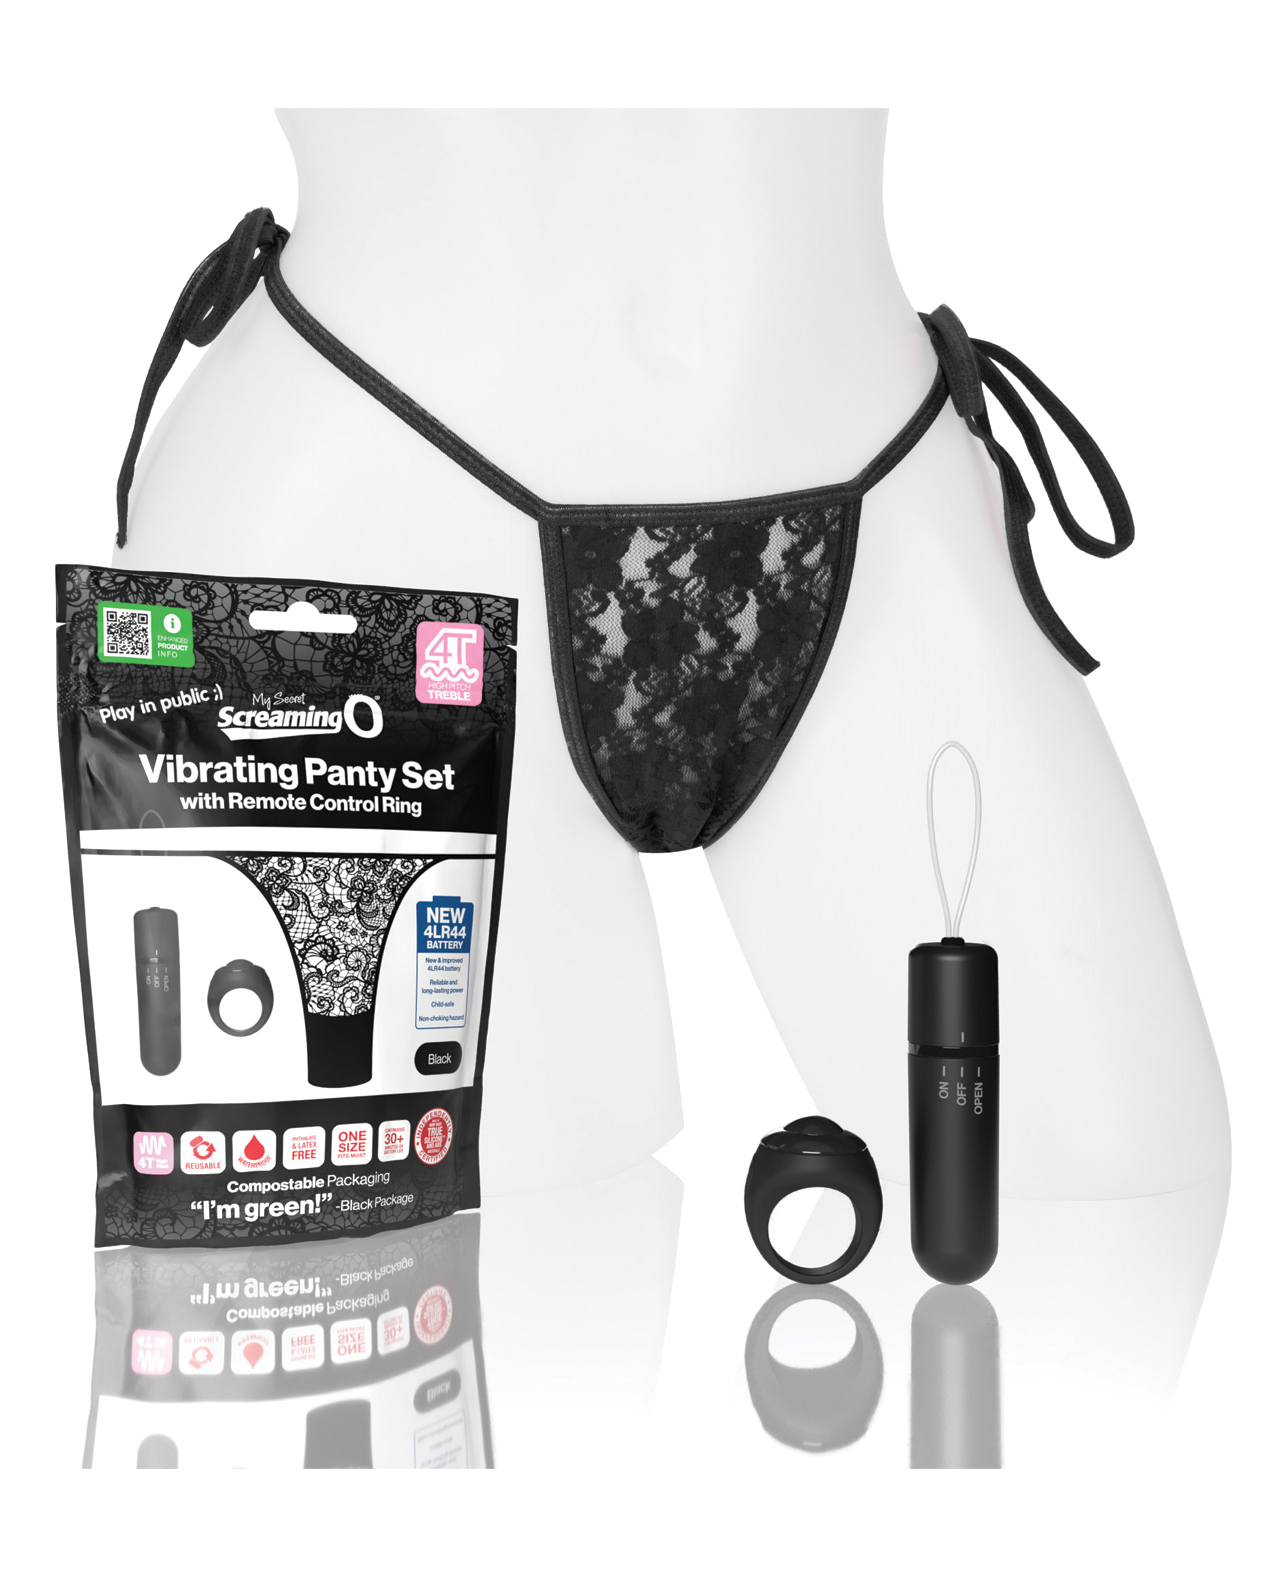 A mannequin body wearing the vibrating panties in black